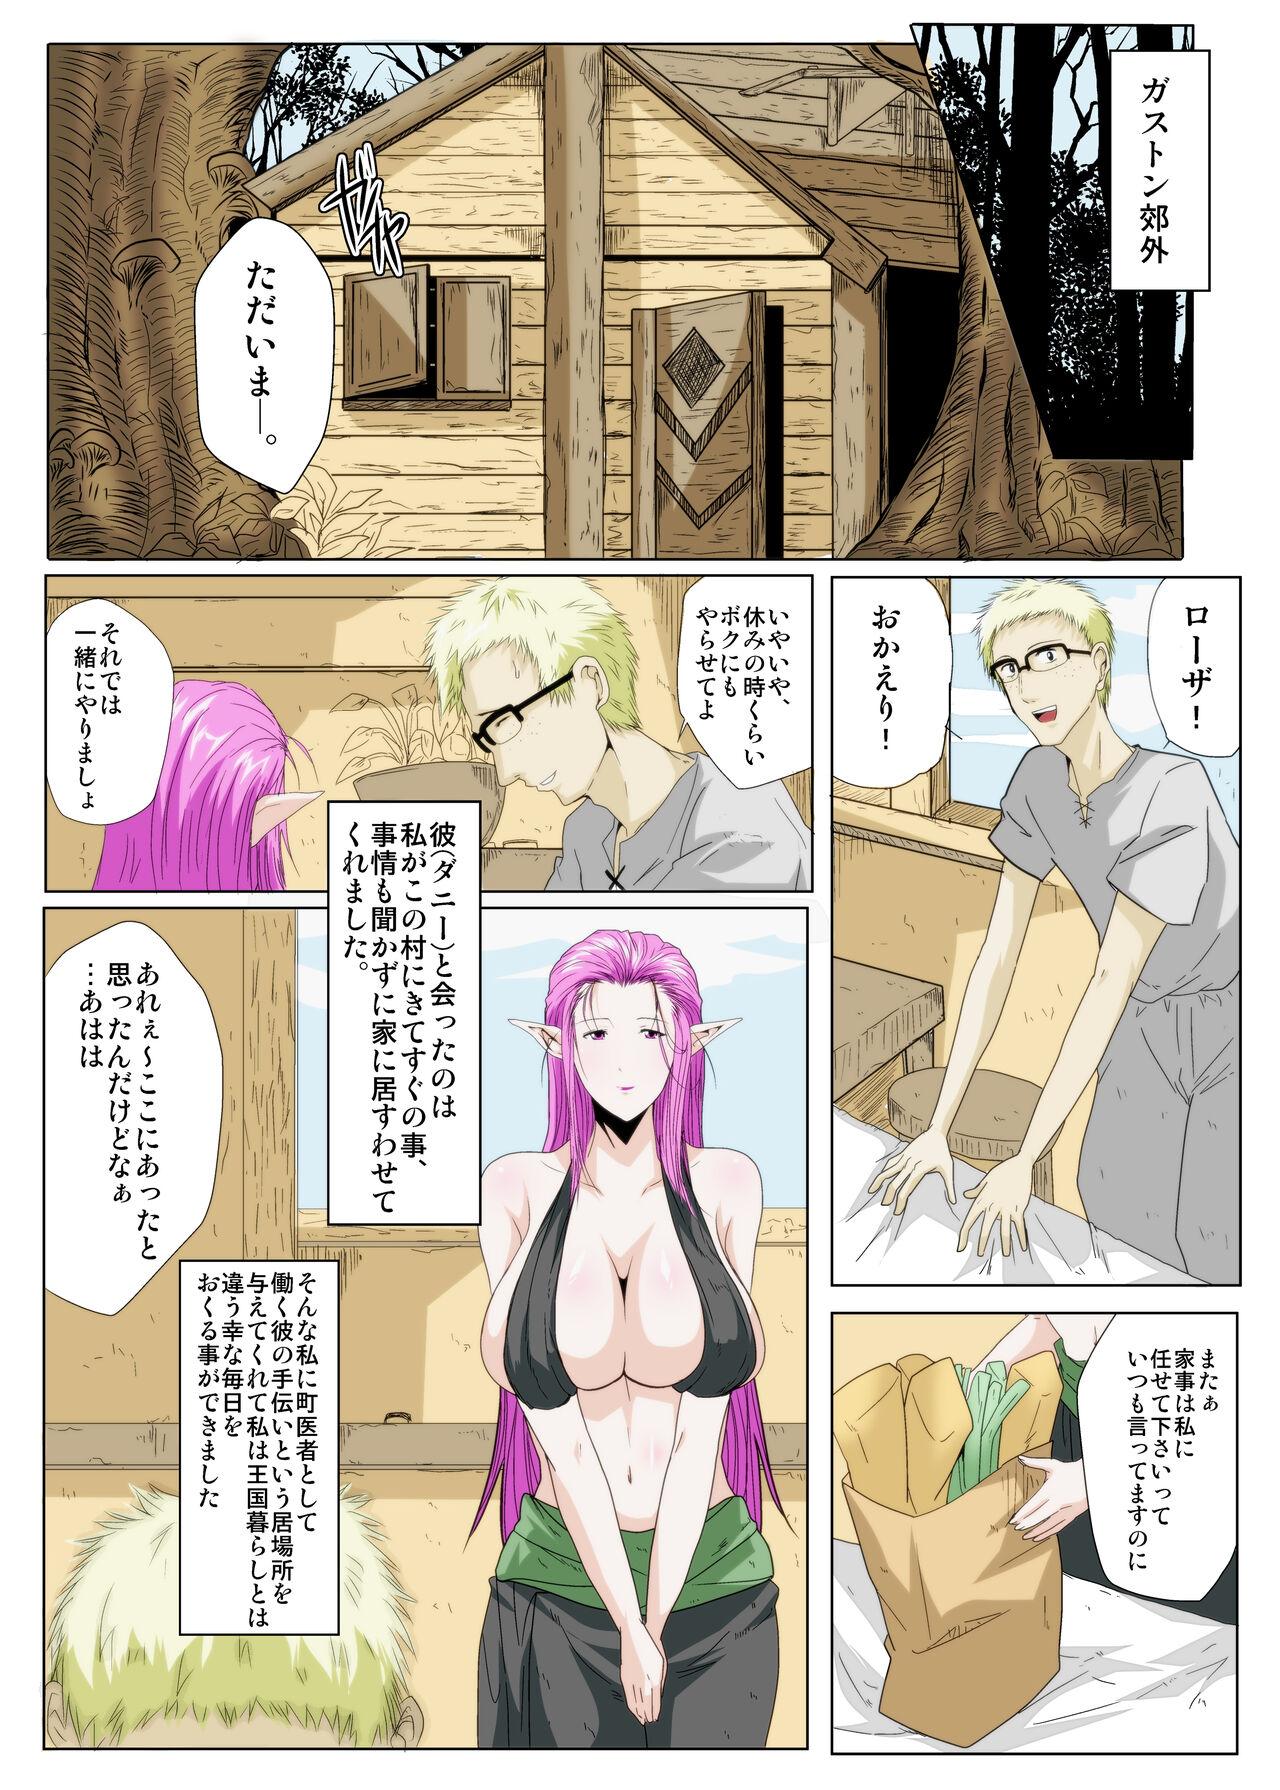 Bisex 僕の∞みんなの彼女 Longhair - Page 4